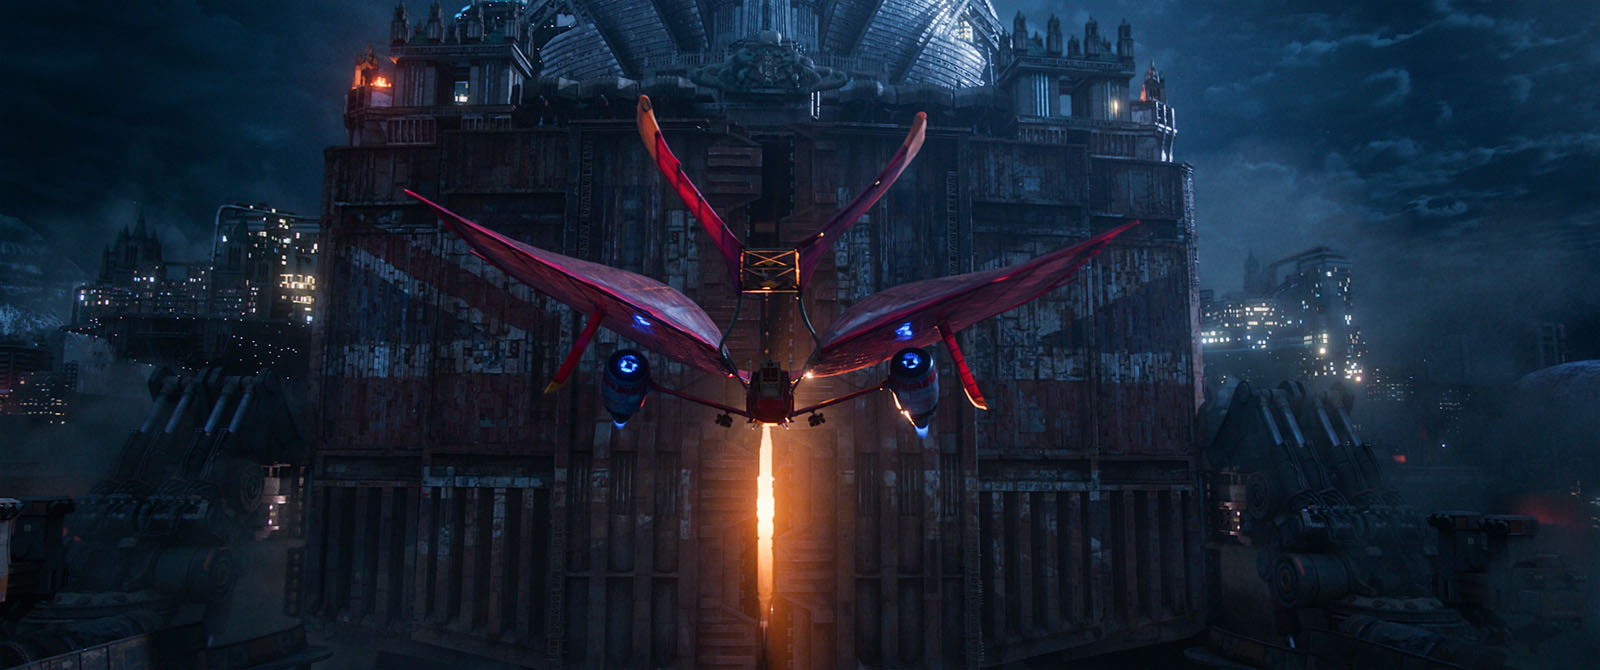 A steampunk airplane in MORTAL ENGINES (2018)